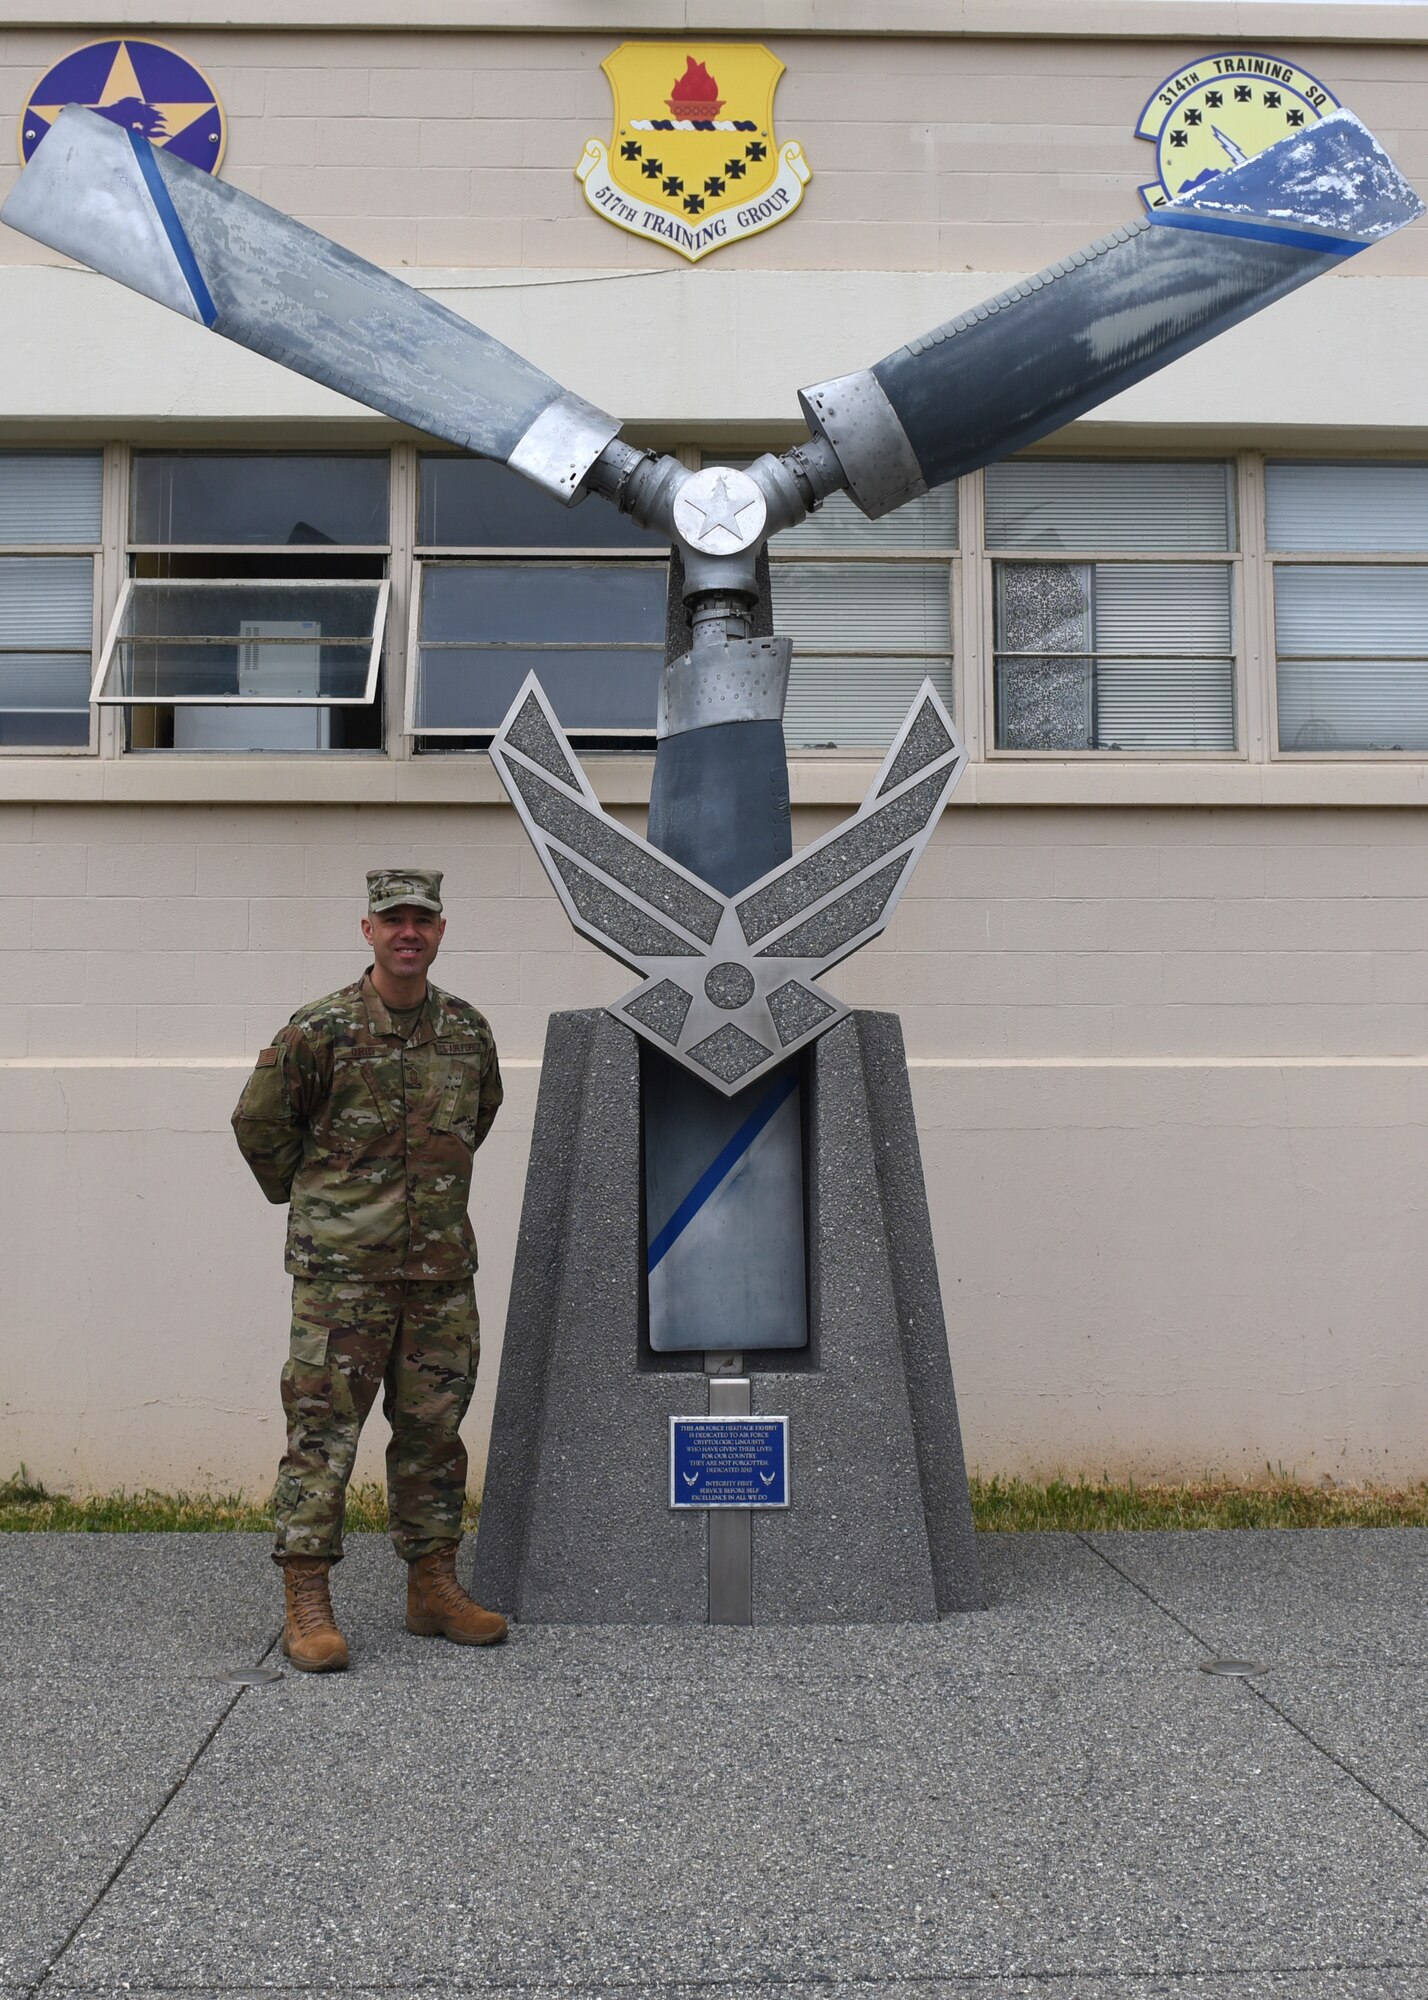 U.S. Air Force Chief Master Sgt. James Curtis, 311th Training Squadron first sergeant, stands with a heritage exhibit at Presidio of Monterey, Calif., May 6, 2019. Curtis has been the first sergeant for the 311th TRS for three years before being assigned to Nellis Air Force Base. (U.S. Air Force photo by Airman 1st Class Zachary Chapman/Released)